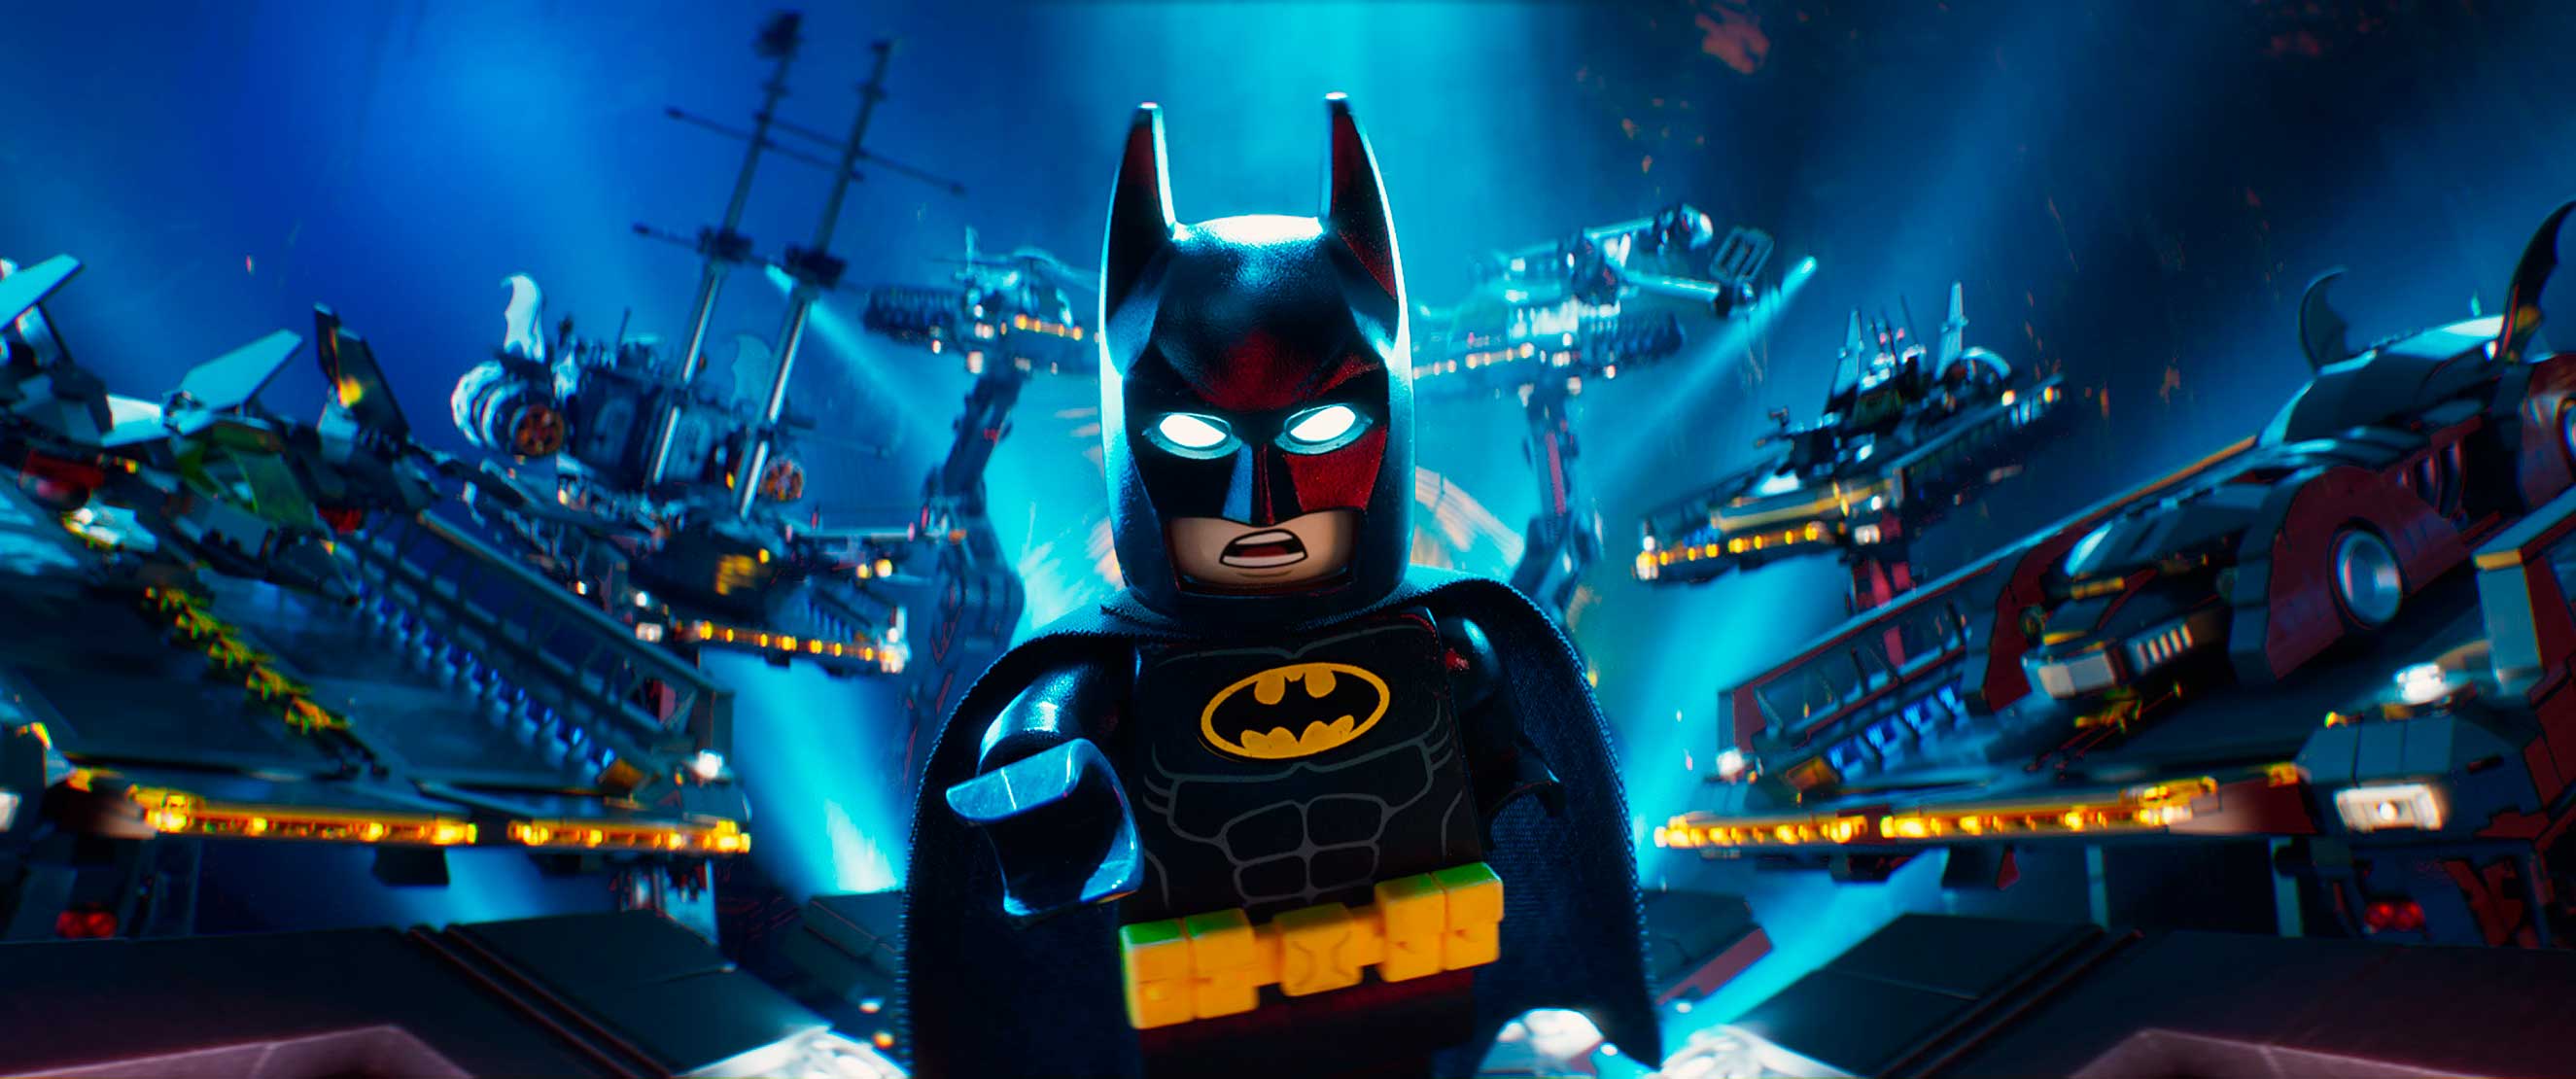 Lego Batman Finds the Funny In Existential Angst | Time